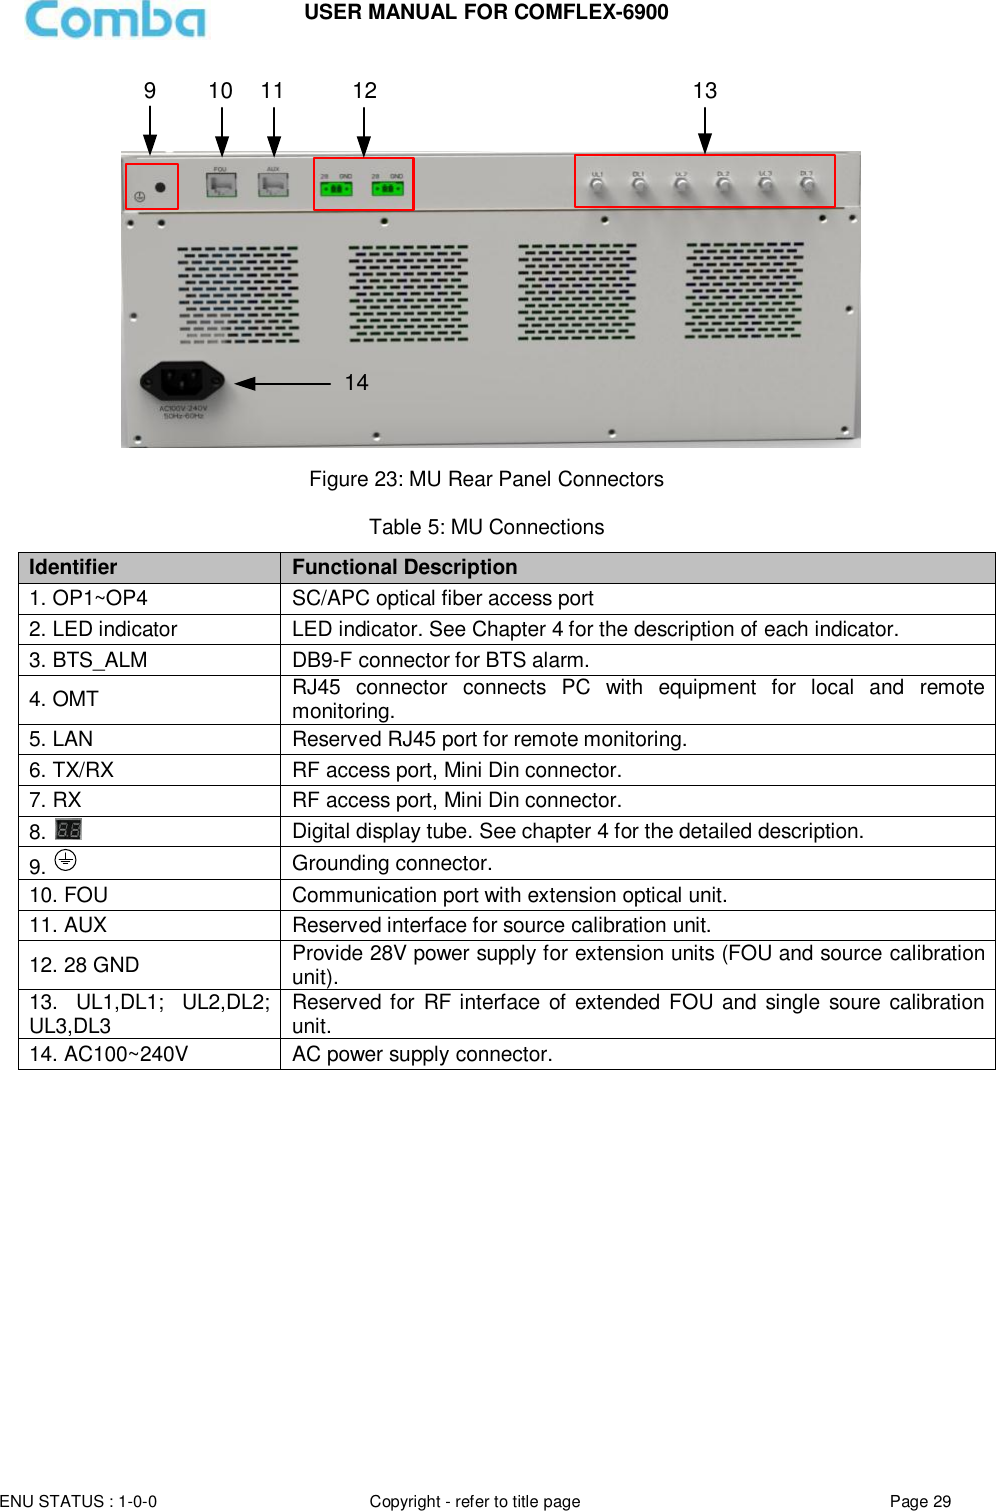 Page 29 of Comba Telecom COMFLEX-6900 ComFlex Series Distributed Antenna System User Manual 